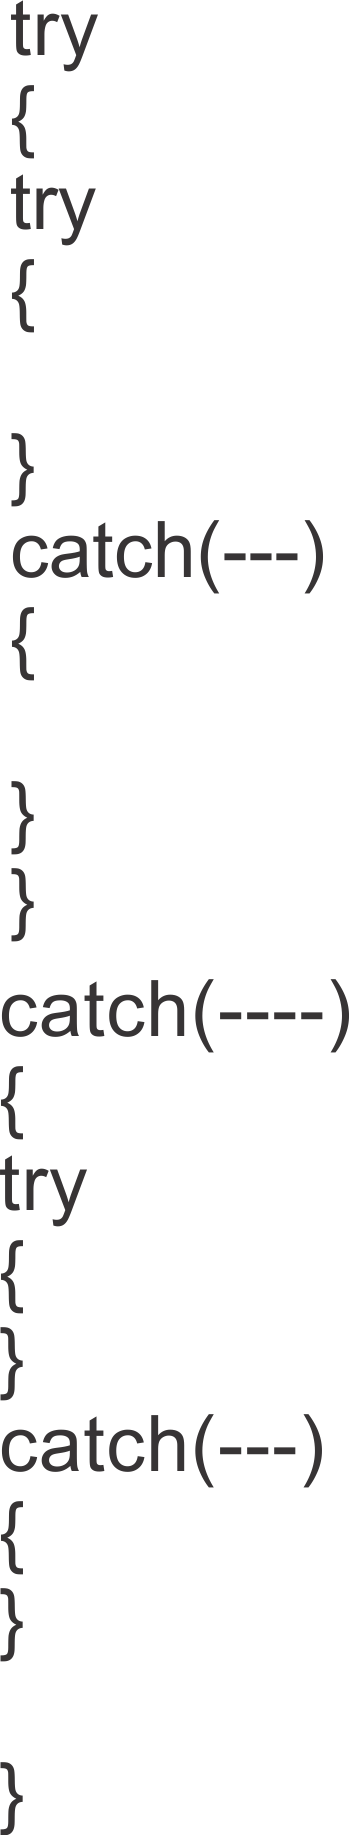 Nested try-catch